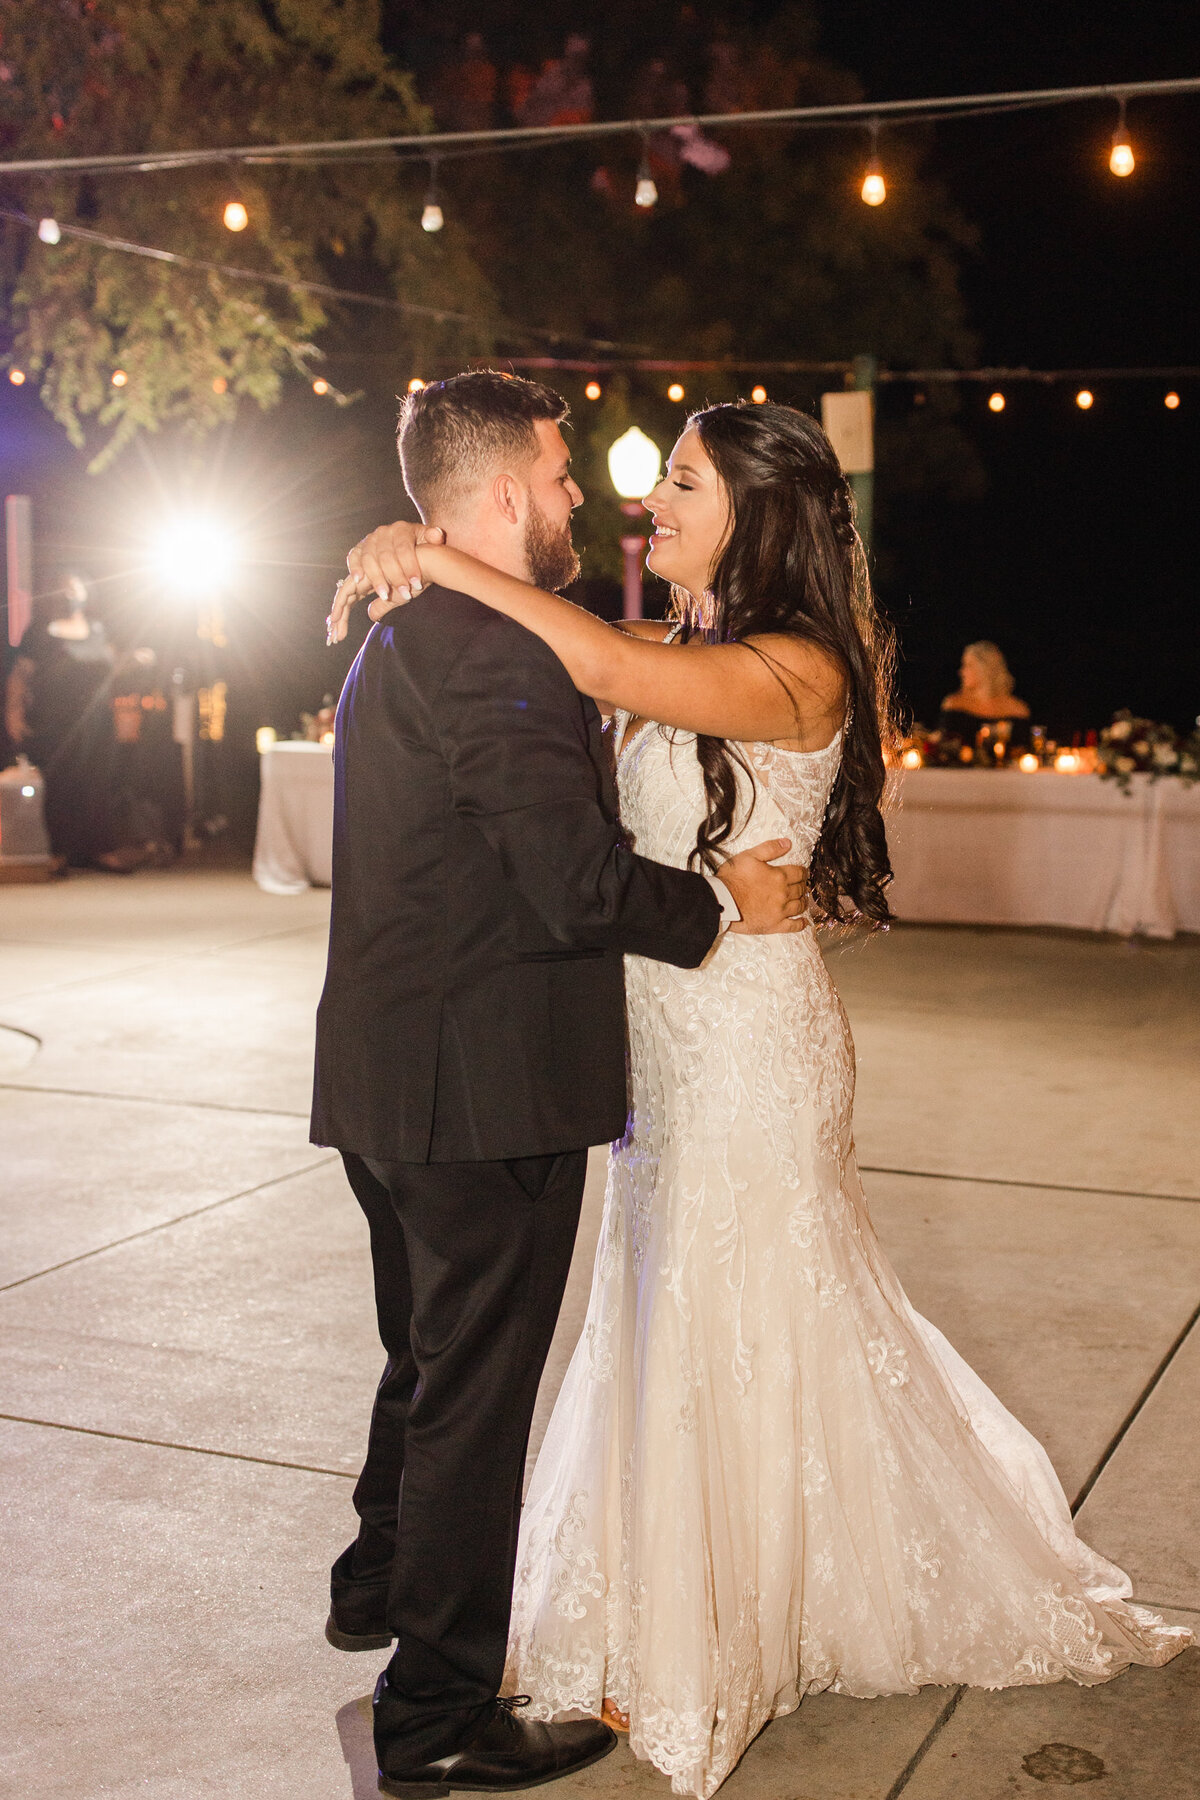 COUPLES-FIRST-DANCE-1